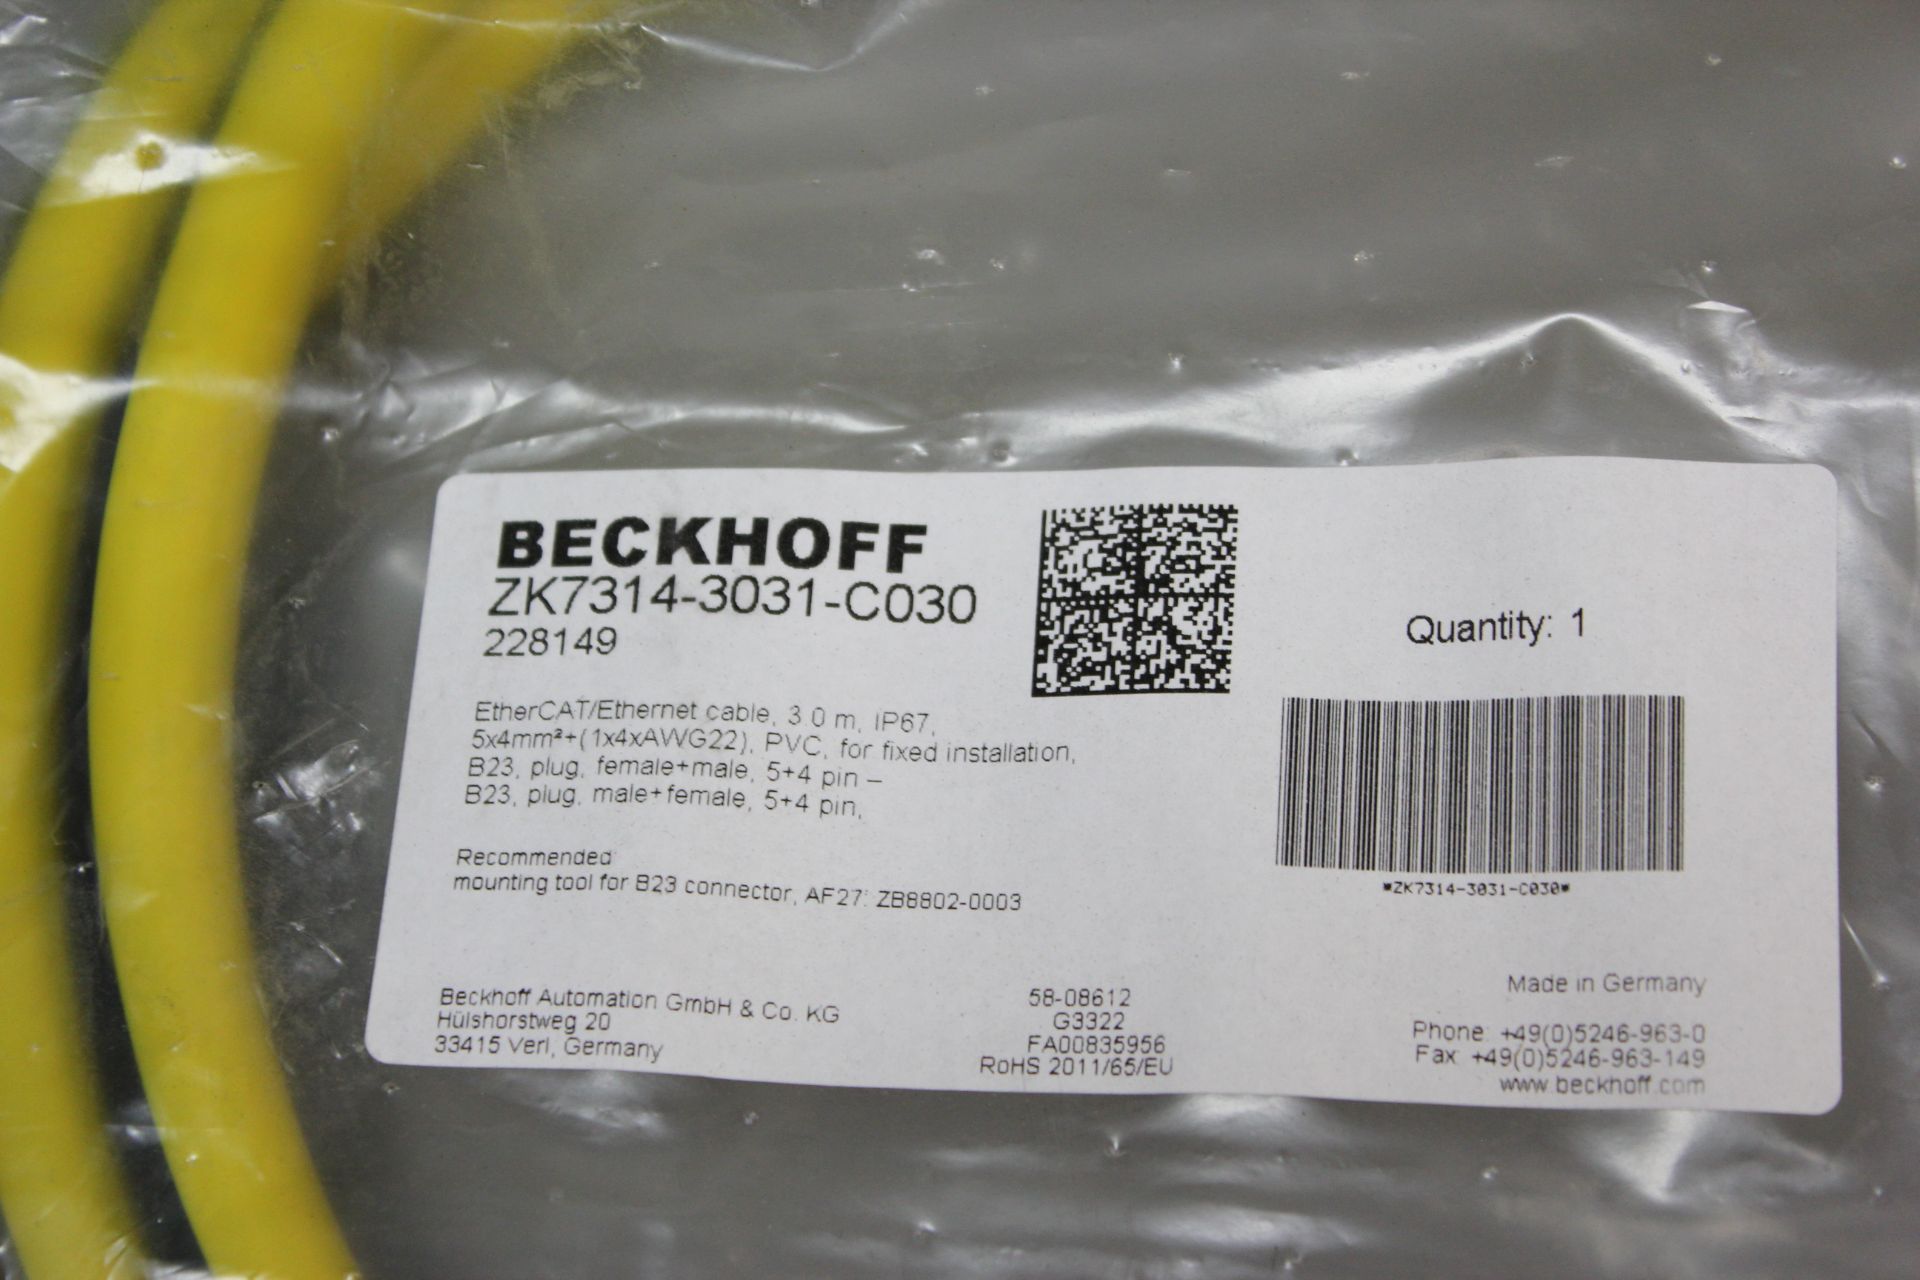 NEW BECKHOFF ETHERCAT/ETHERNET CABLE ASSEMBLY - Image 2 of 2